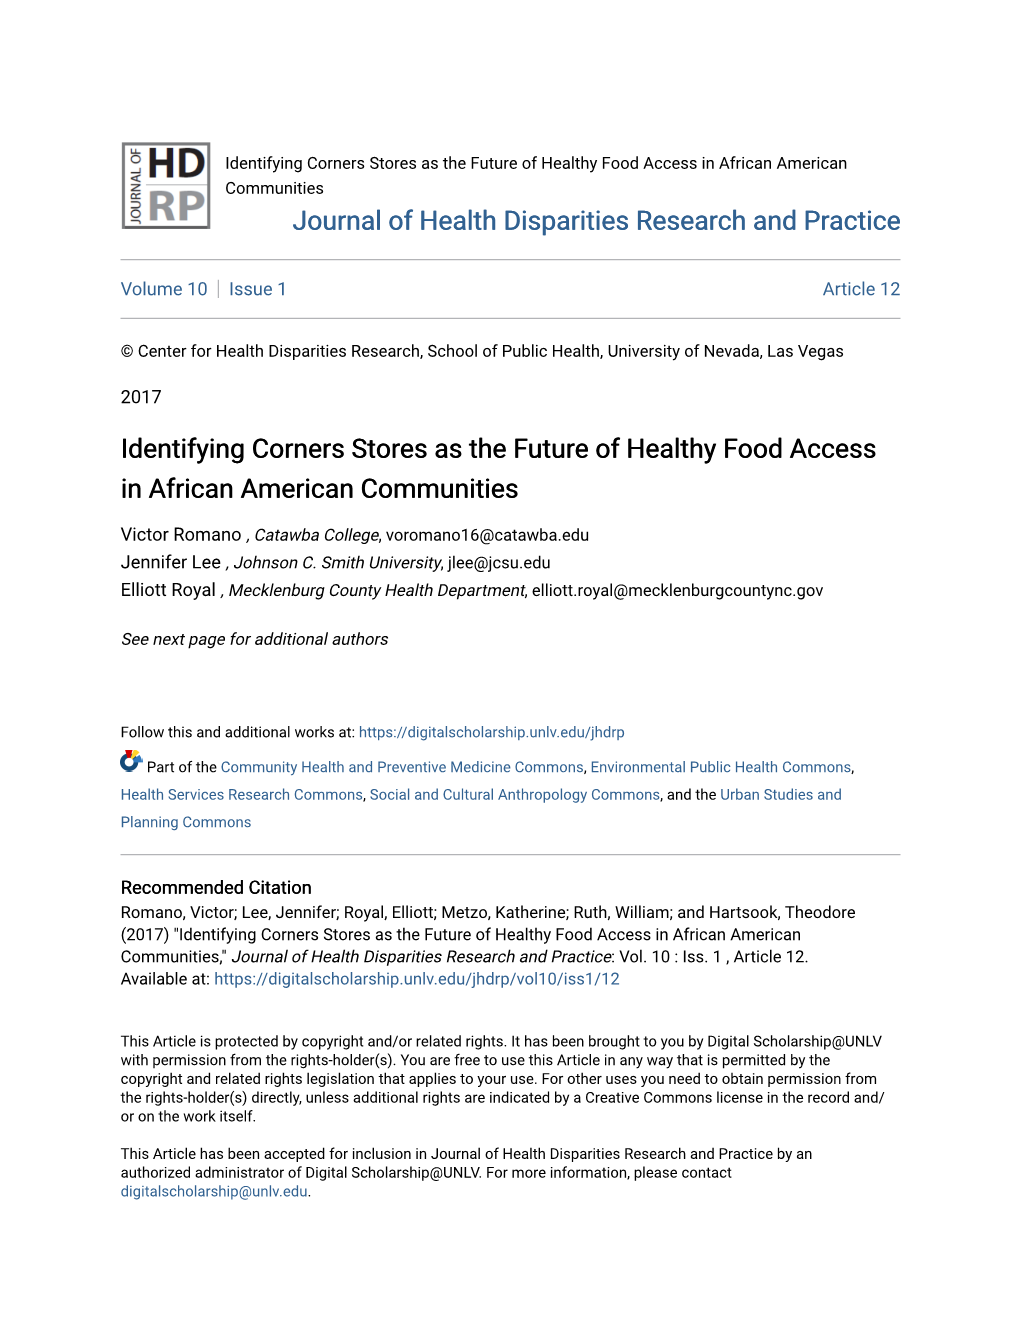 Identifying Corners Stores As the Future of Healthy Food Access in African American Communities Journal of Health Disparities Research and Practice